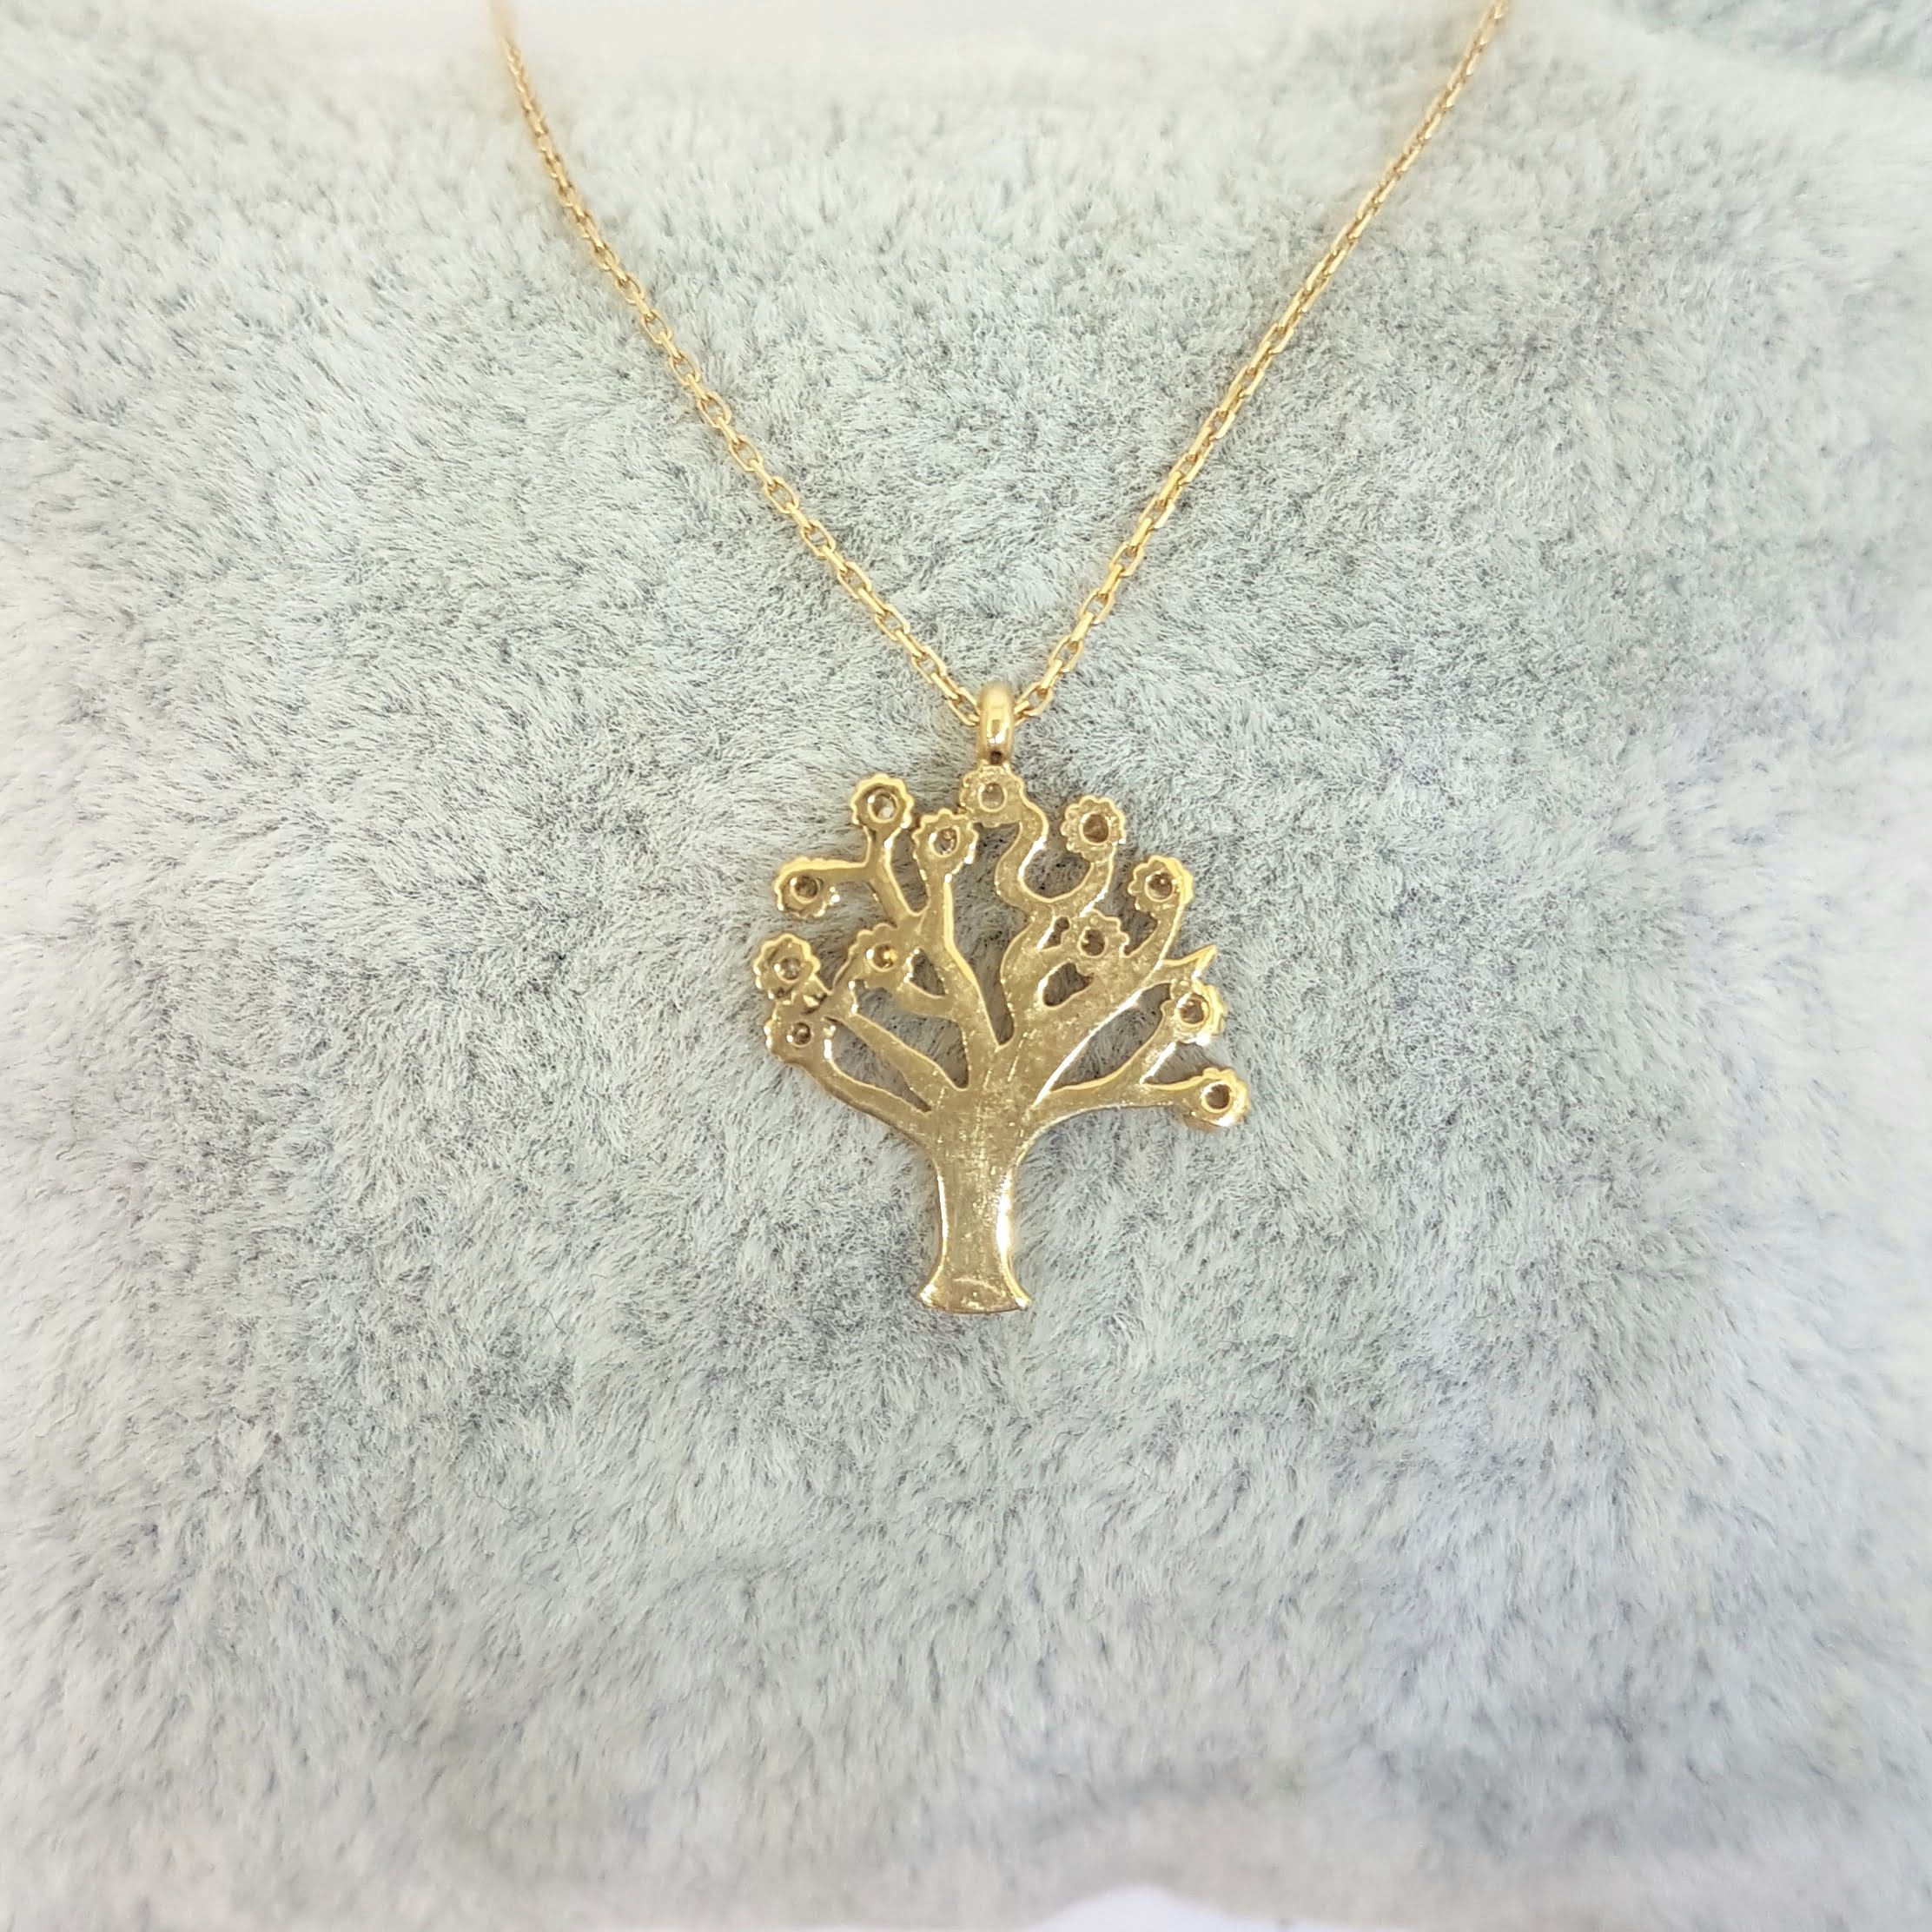 Celtic Jewelry 14k Gold Necklace Yellow Gold Jewelry Solid Gold Necklace Gold Jewelry Gift for Girlfriend 14k Gold Pendant